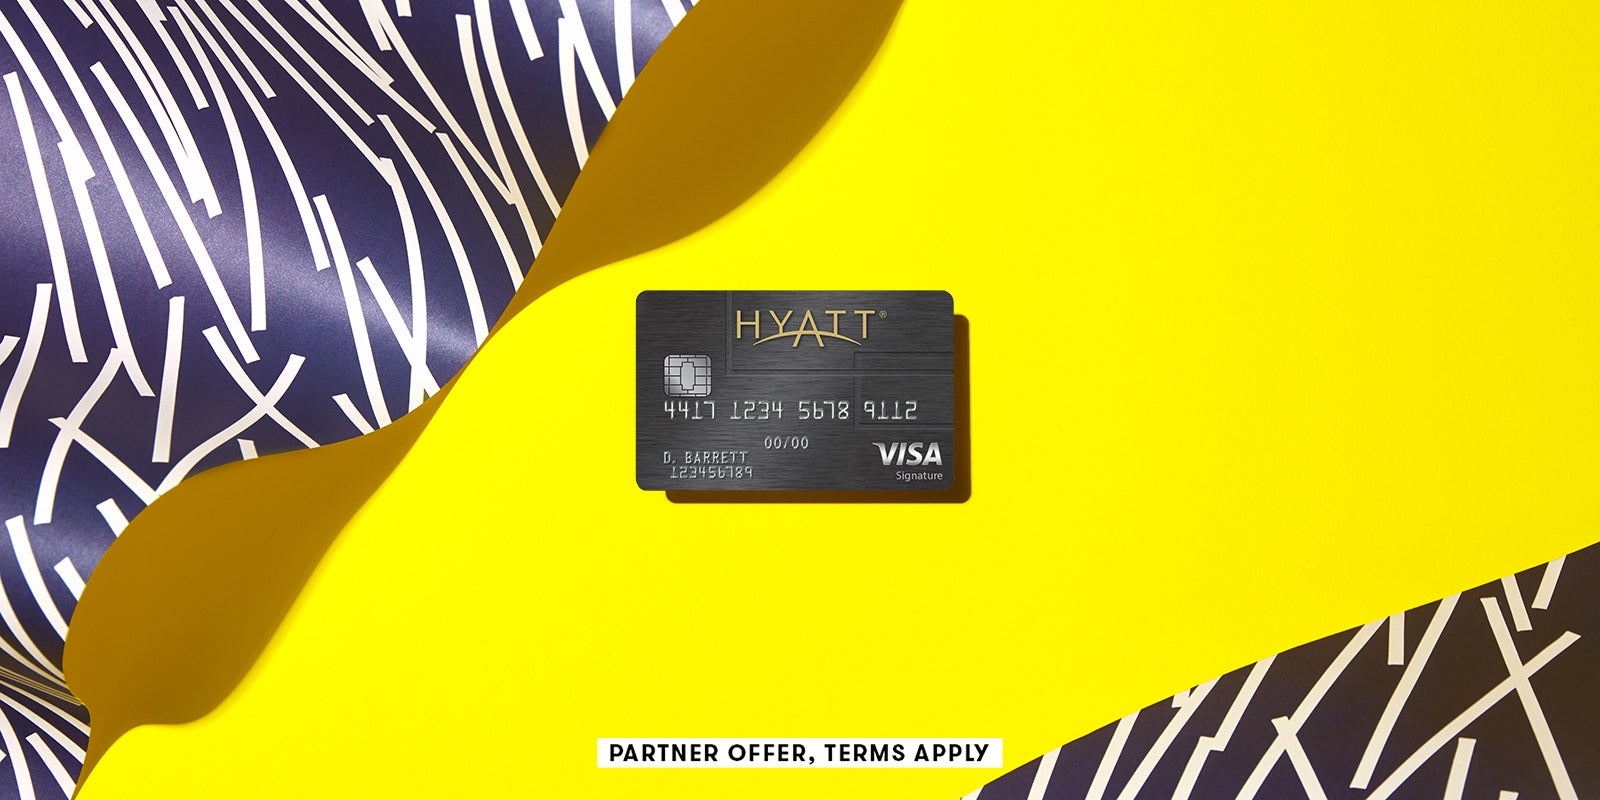 hyatt-is-eliminating-its-legacy-credit-card-here-s-what-you-need-to-know